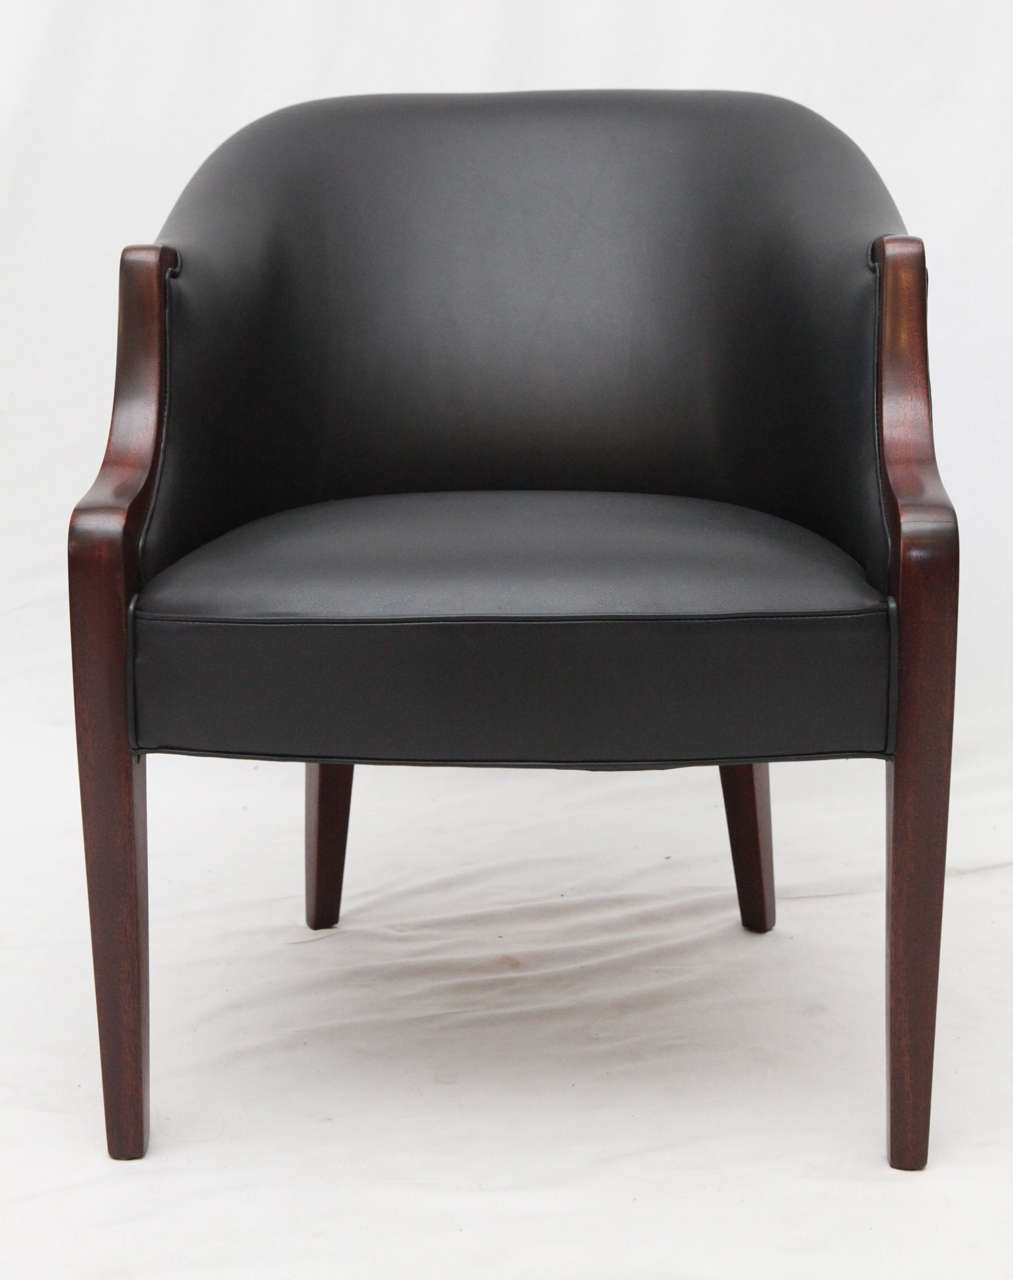 Vintage Danish club chair in the style of Frits Henningsen.  Store formerly known as ARTFUL DODGER INC